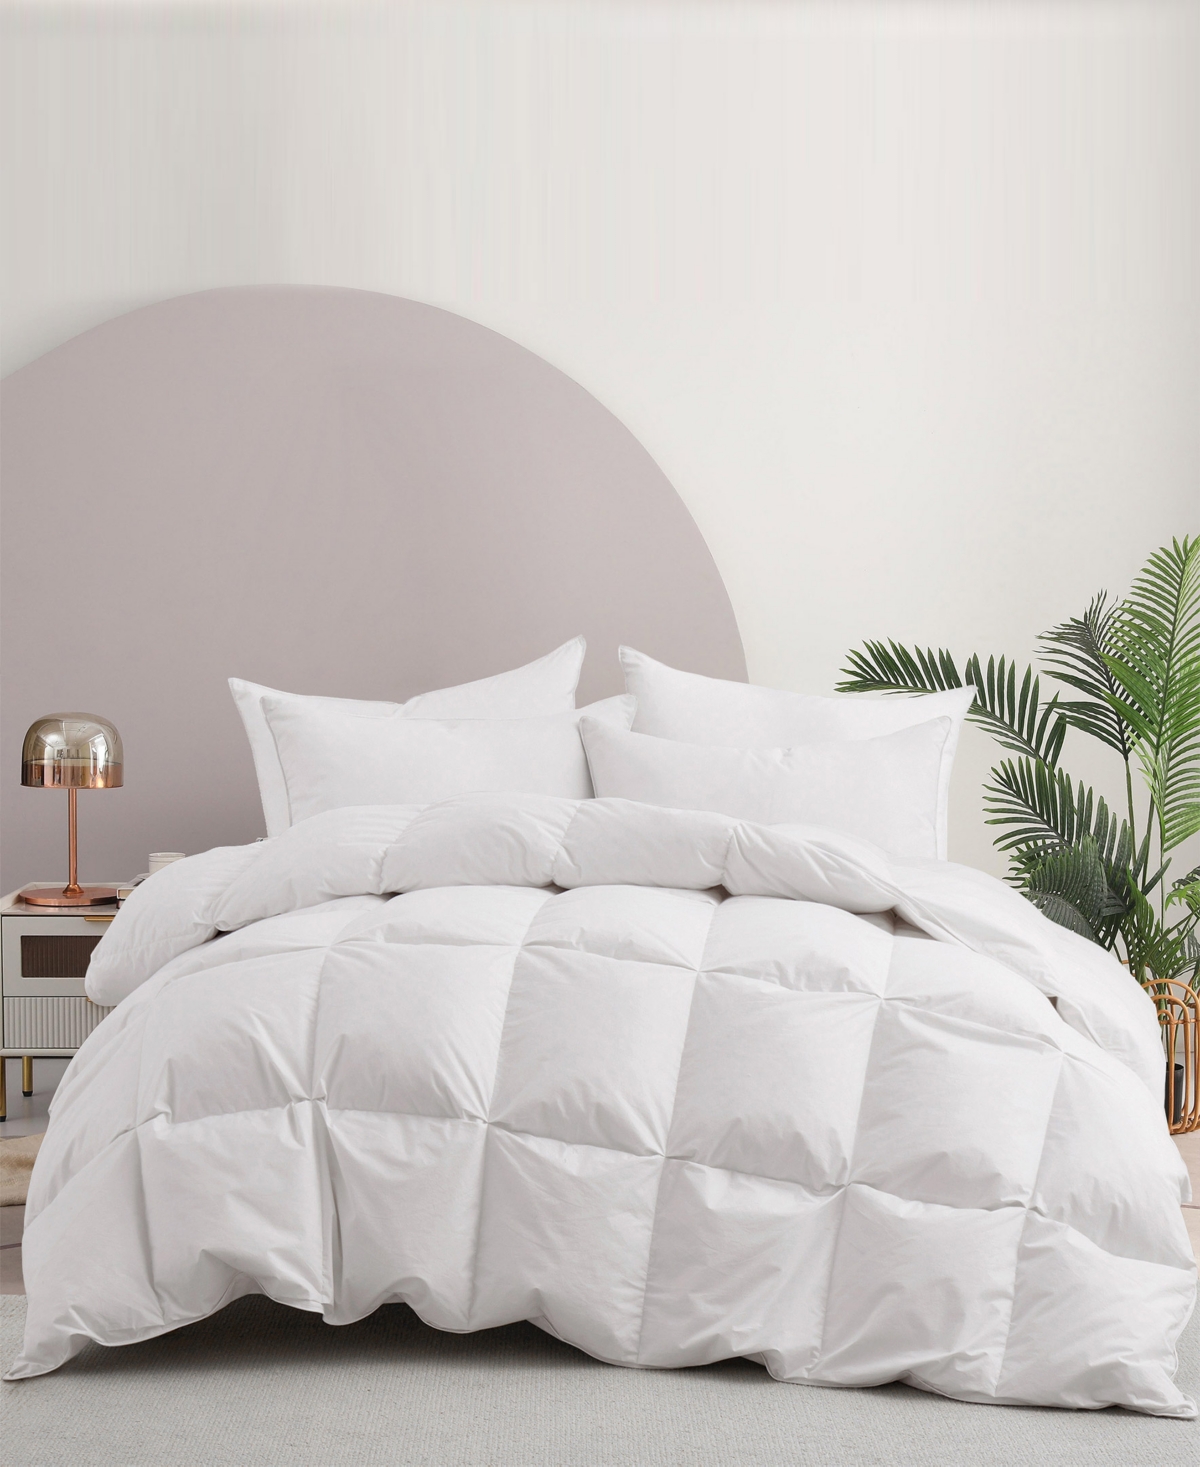 Unikome Cotton Fabric Baffled Box All Season Colored Goose Feather And Down Comforter, Full/queen In White